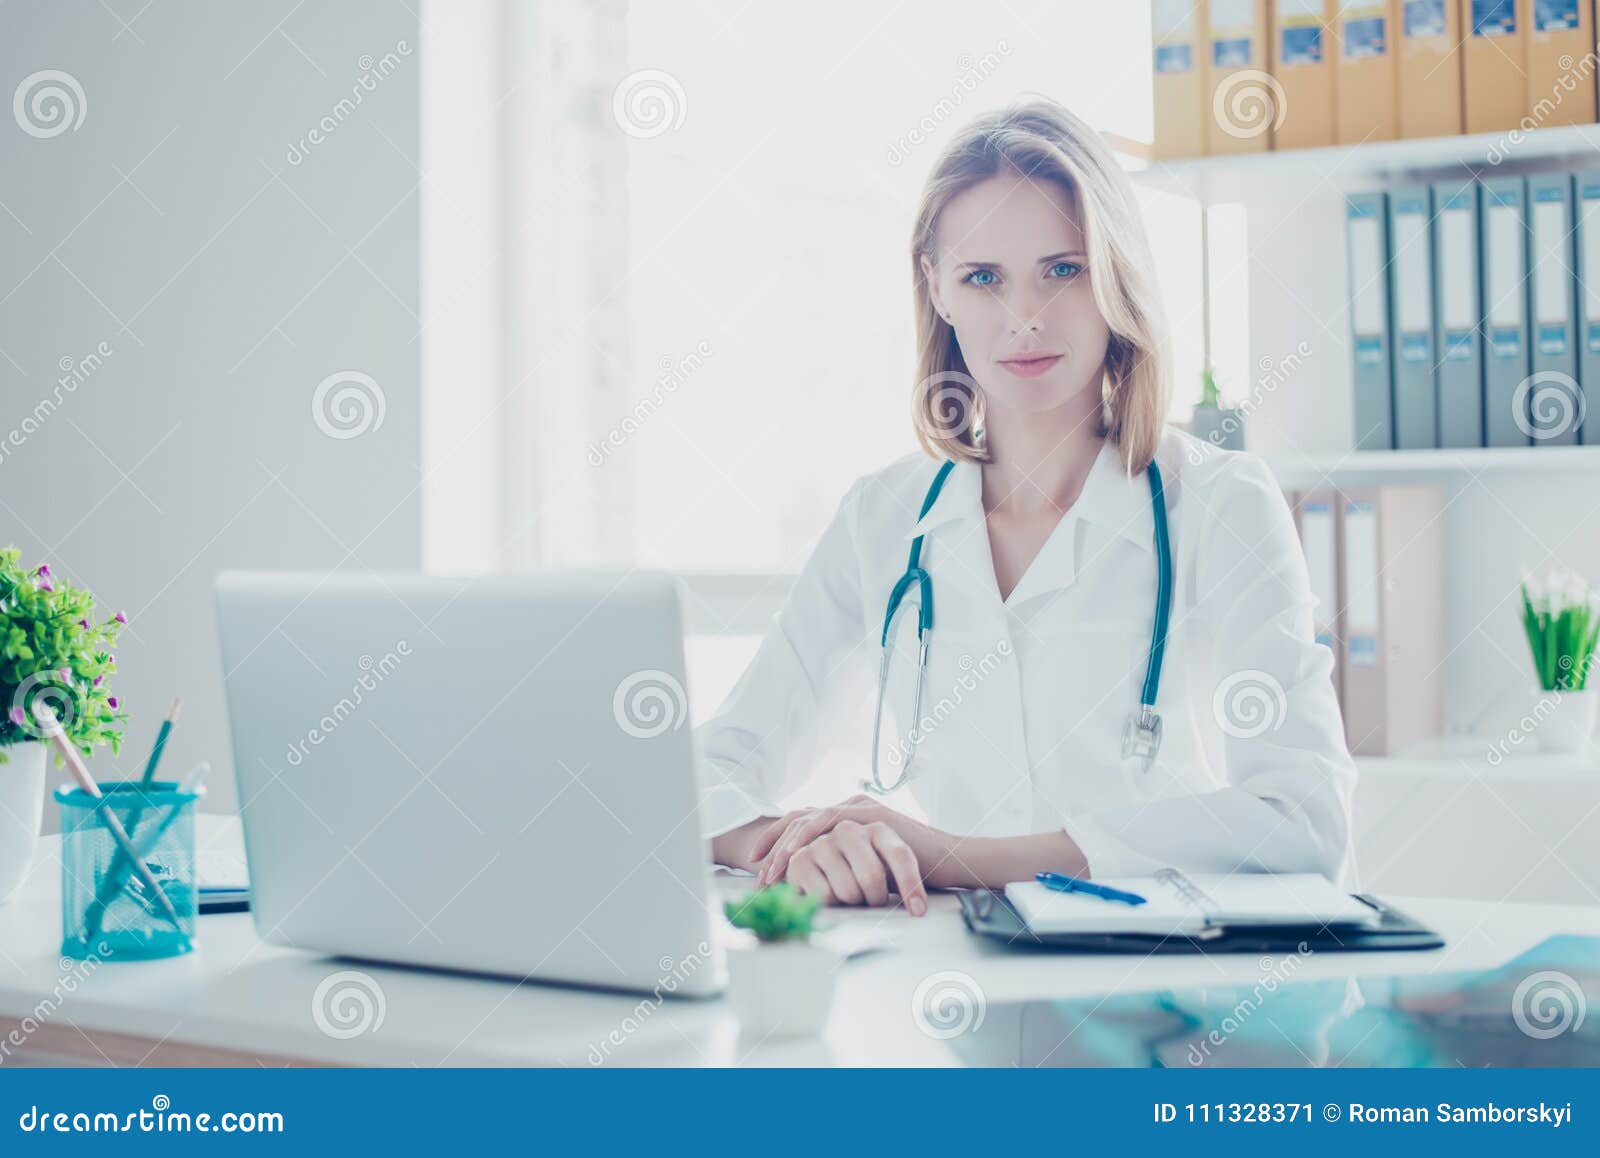 portrait of confident concentrated medico wearing white coat, sh